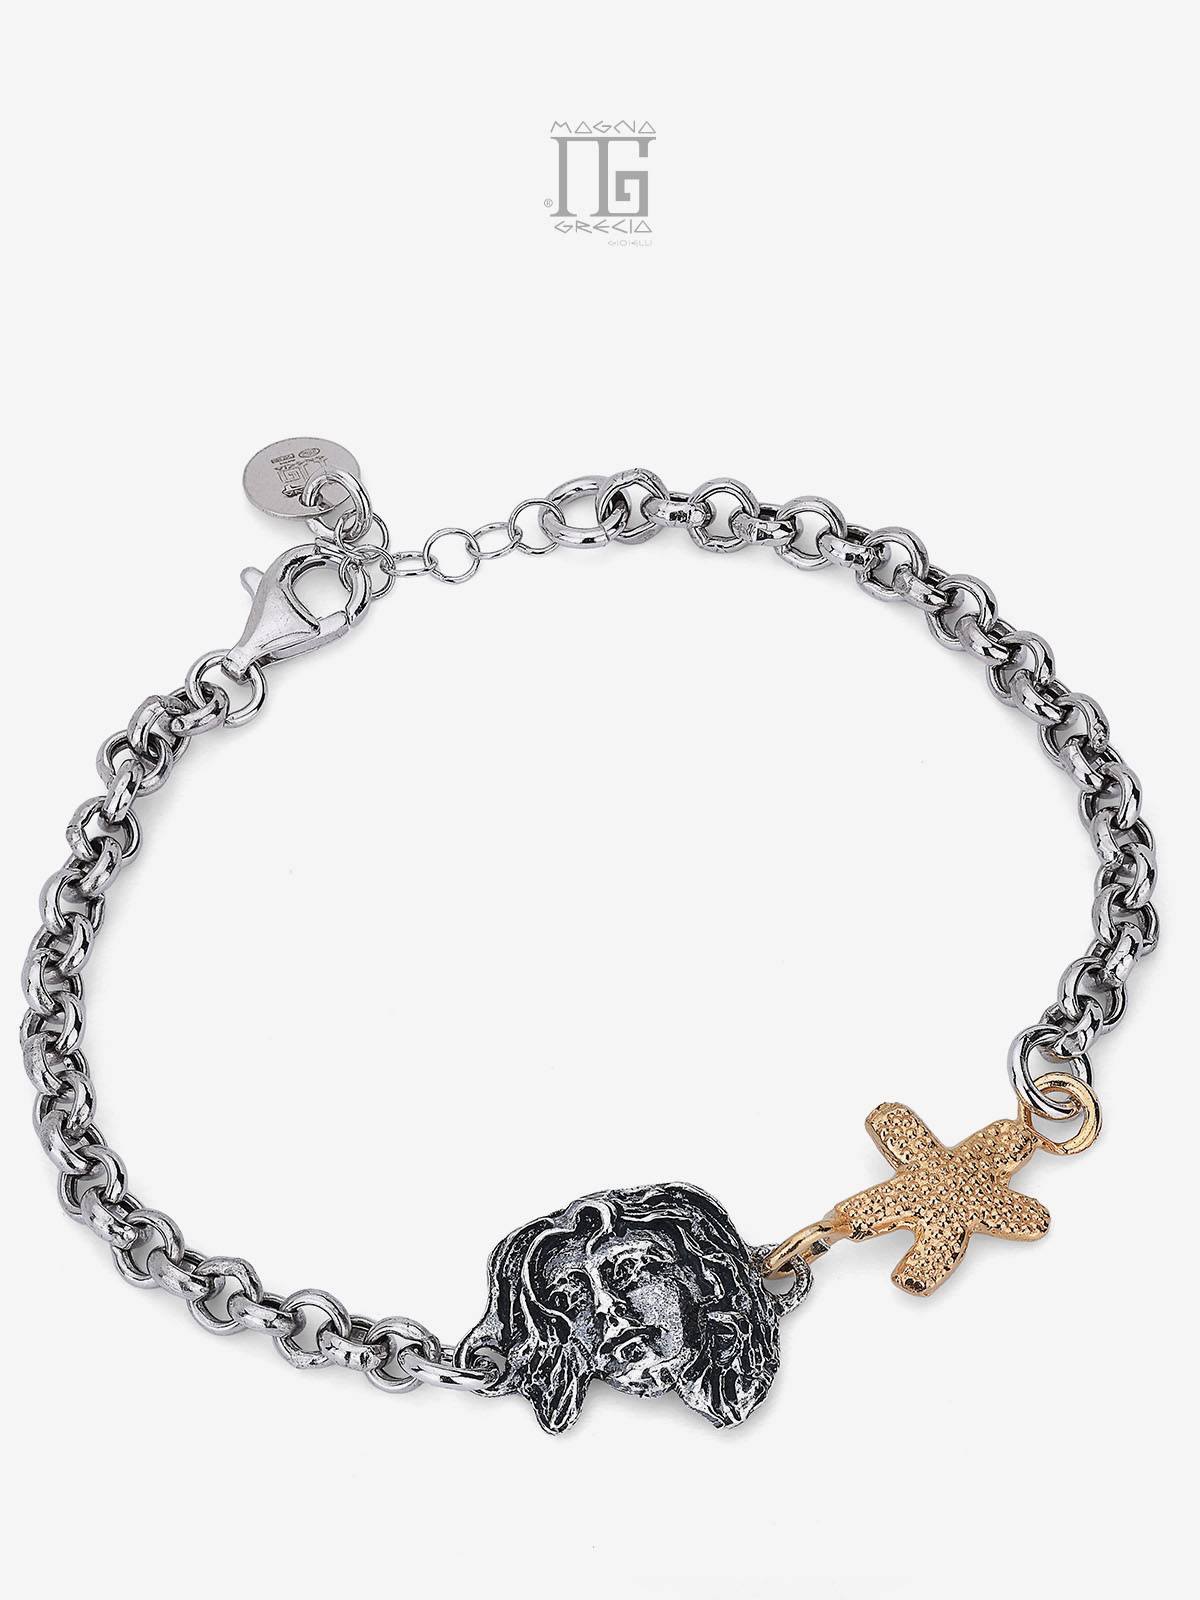 “Summer” Bracelet in Silver with the Face of the Goddess Venus and Starfish depicted Cod. MGK 4258 V-2